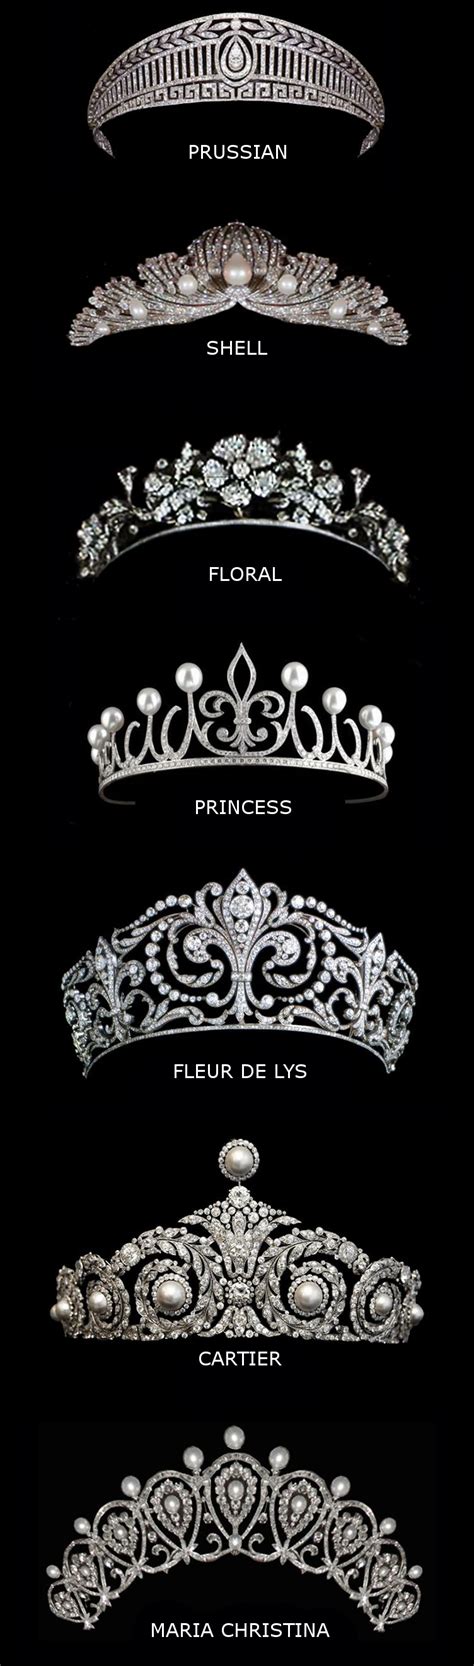 how to say tiara in spanish